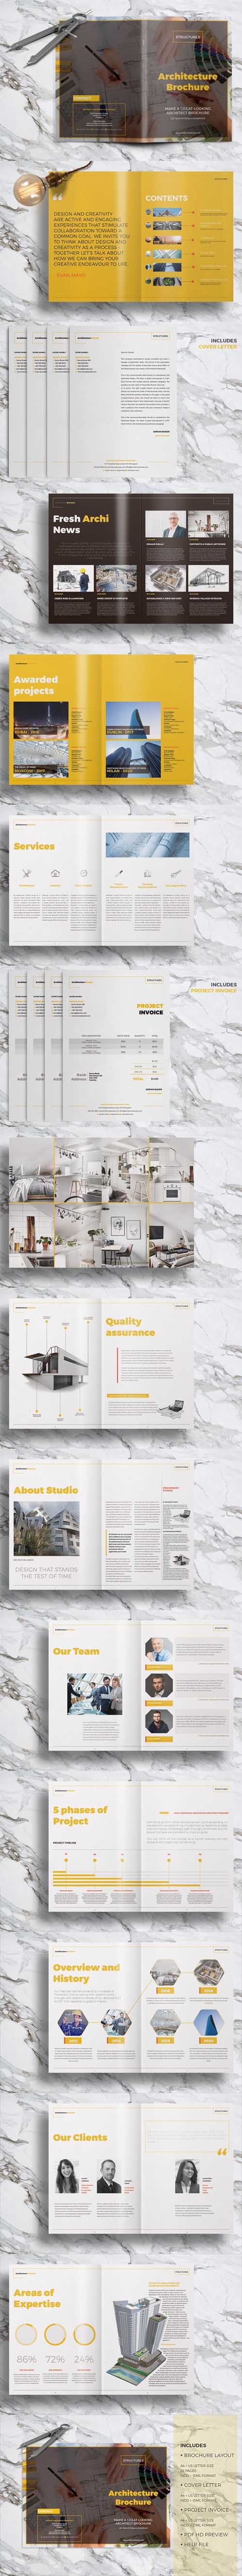 Architecture Brochure Indesign Template